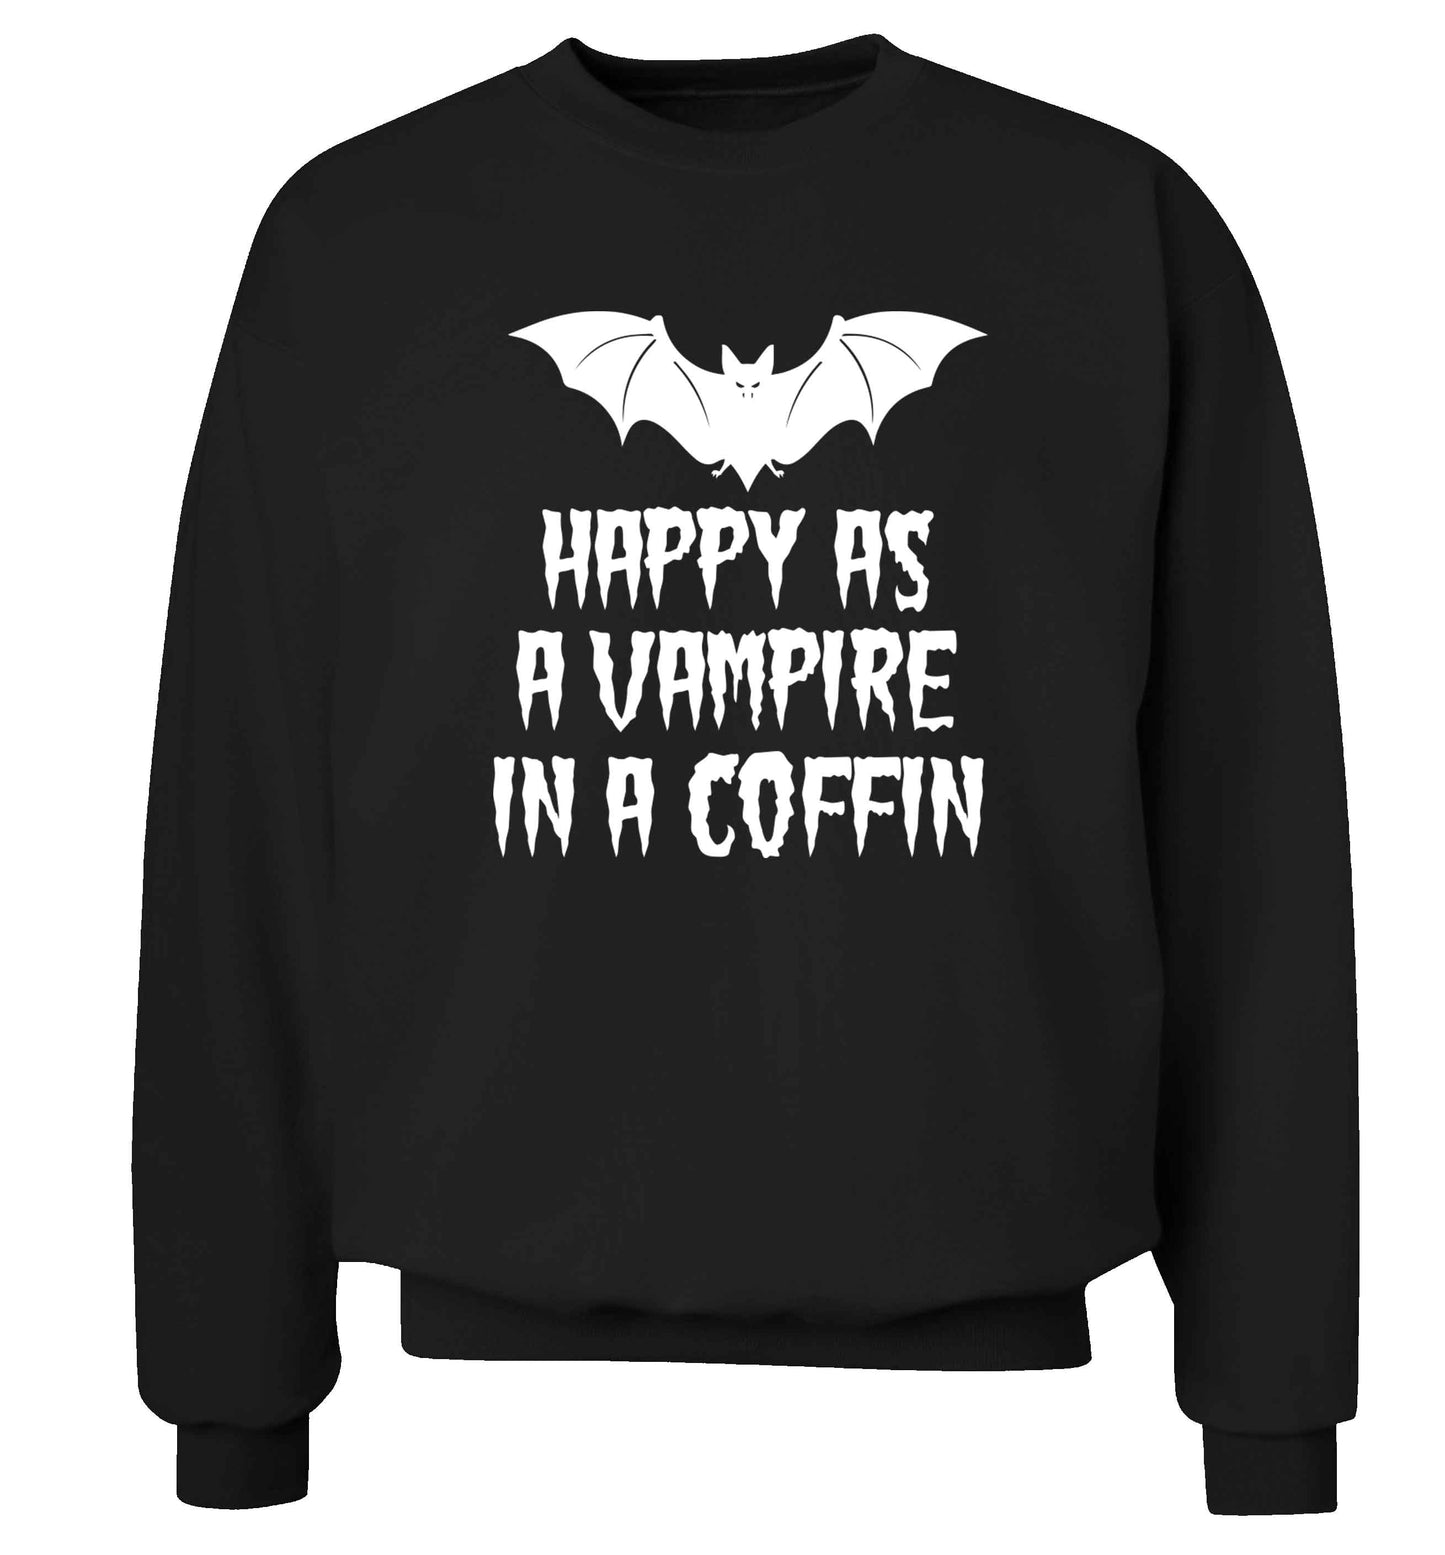 Happy as a vampire in a coffin Adult's unisex black Sweater 2XL